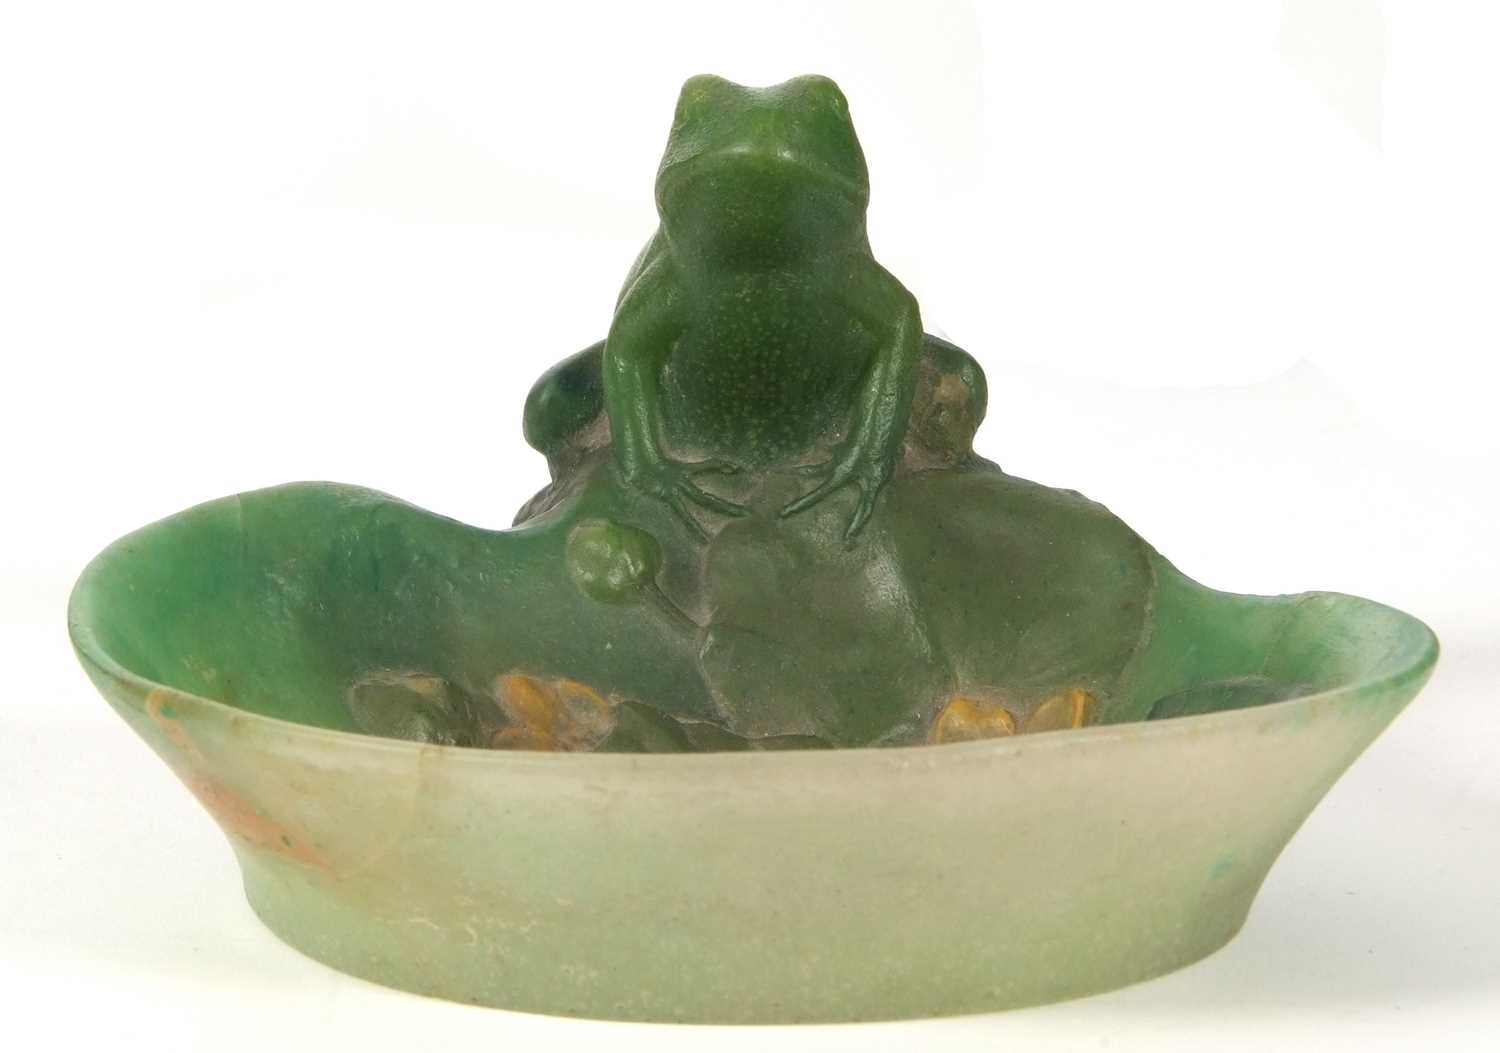 An Almeric Walter pate de verre dish c1920 designed by Henri Berge modelled as a green coloured frog - Image 7 of 11